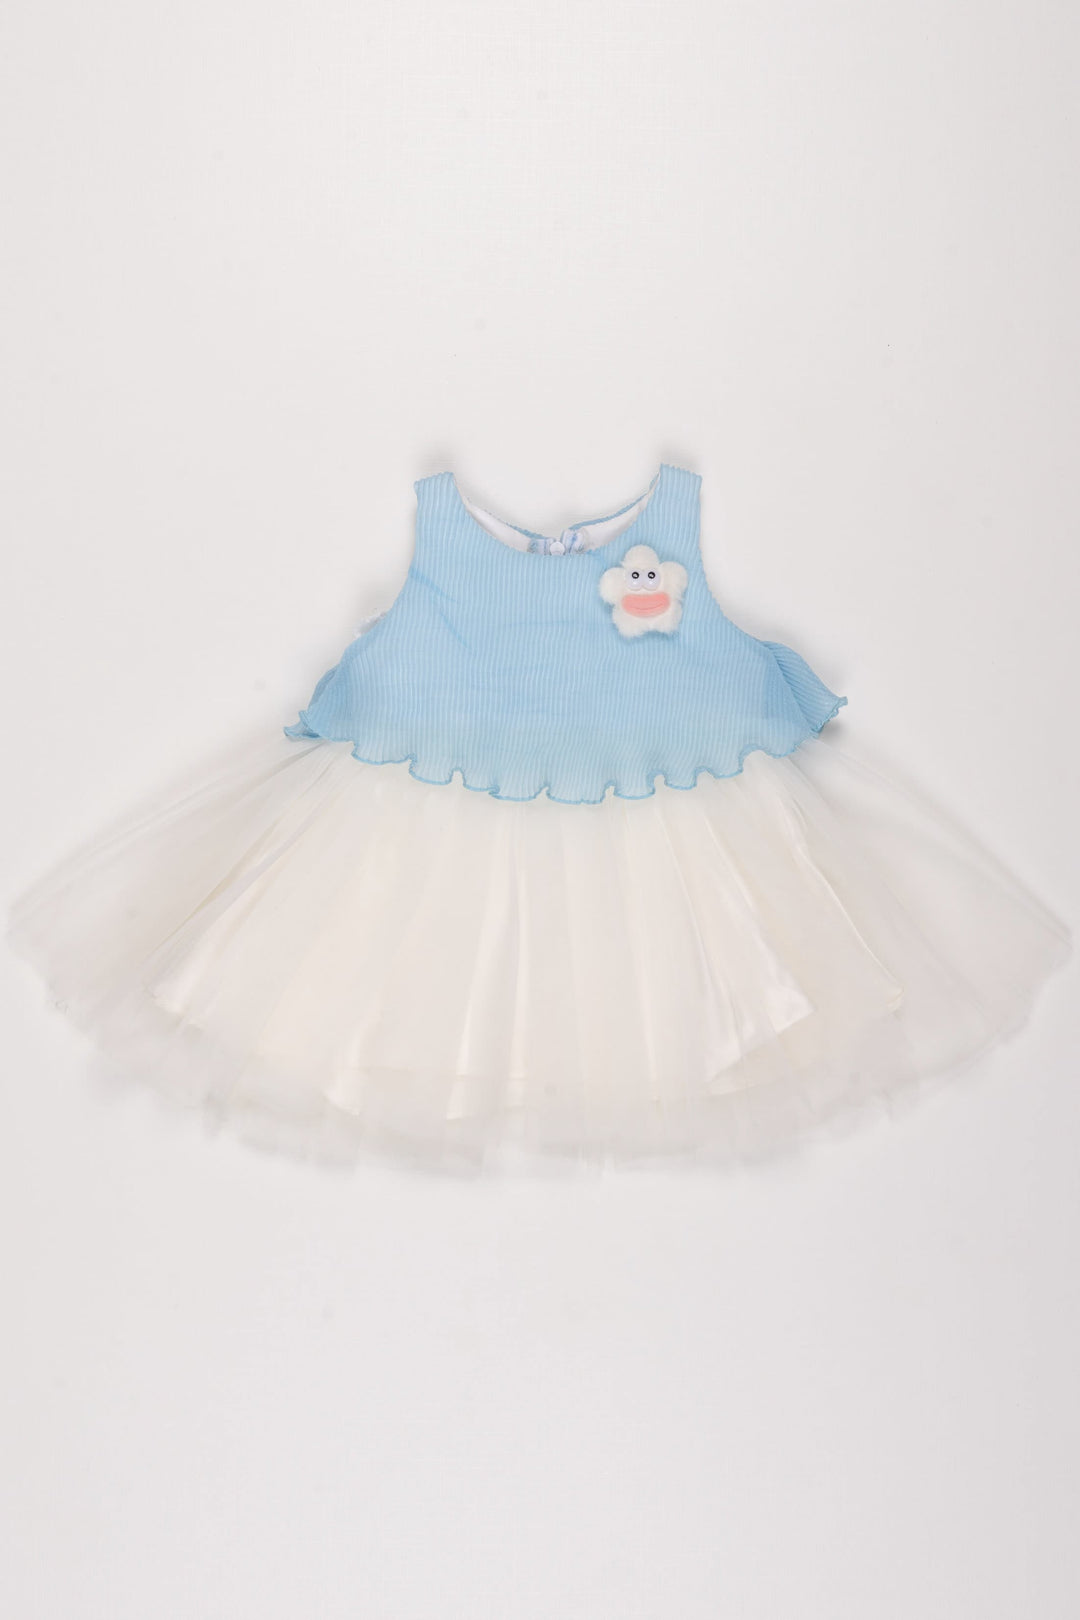 The Nesavu Girls Tutu Frock Sky Blue Knit and White Tulle Dress with Plush Accent for Girls Nesavu 12 (3M) / Blue / Plain Net PF170B-12 Girls Sky Blue Tulle Dress | Whimsical Cloud Knit Dress for Toddlers | Thee Nesavu